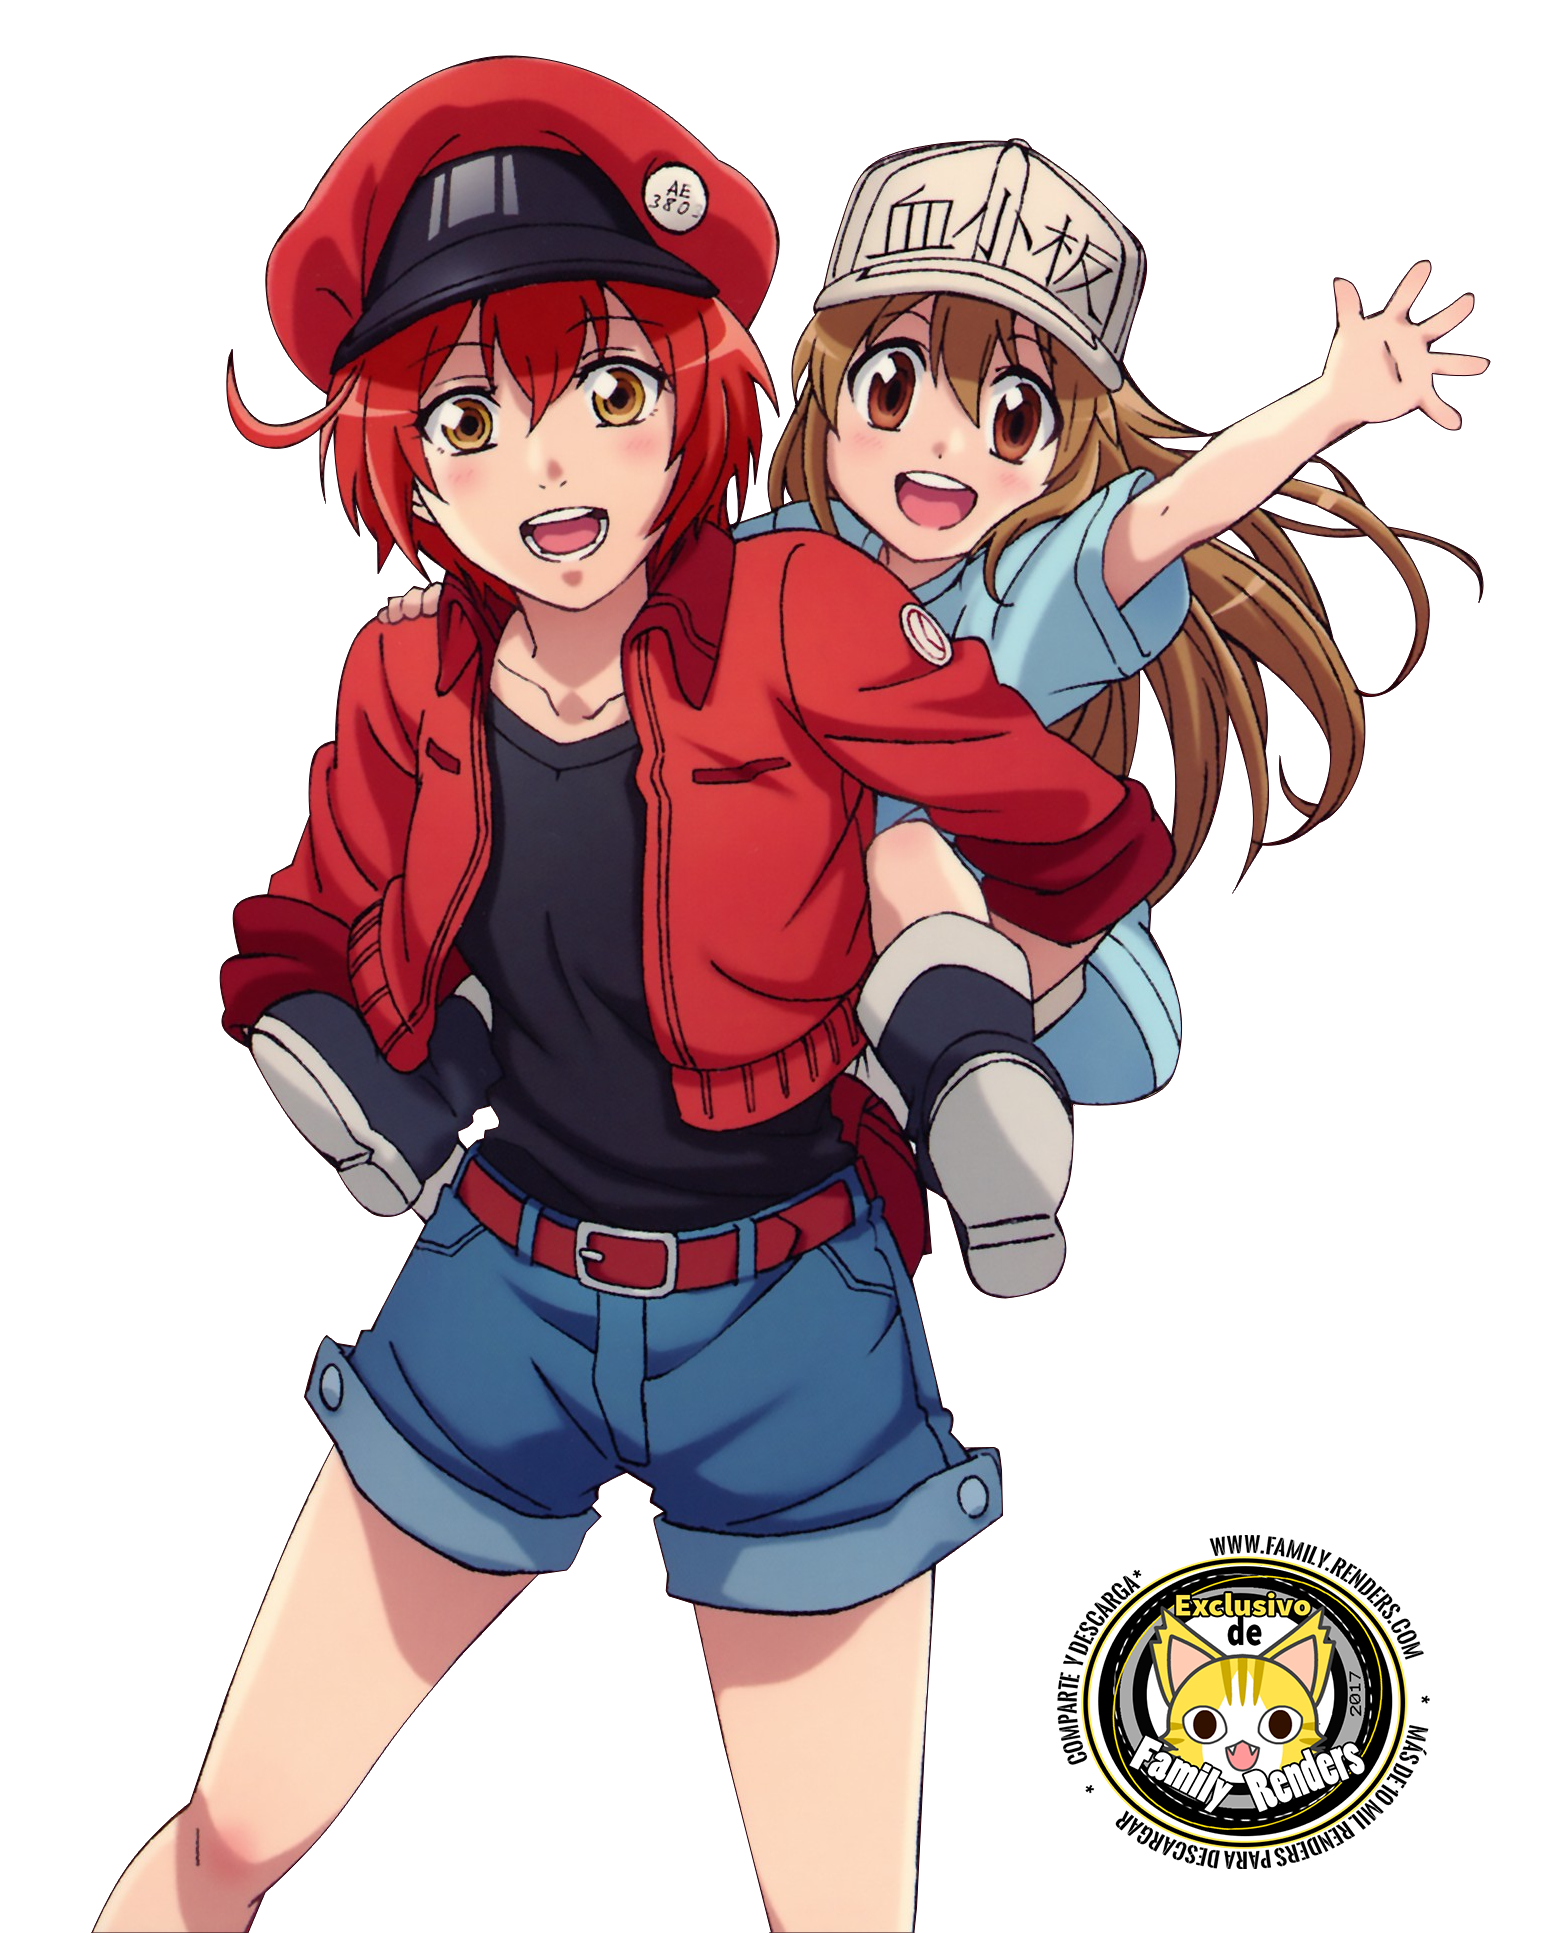 Hataraku Saibou Family - New character from the app game. #Osteoblast The  app only have Japan's server. It really cute.